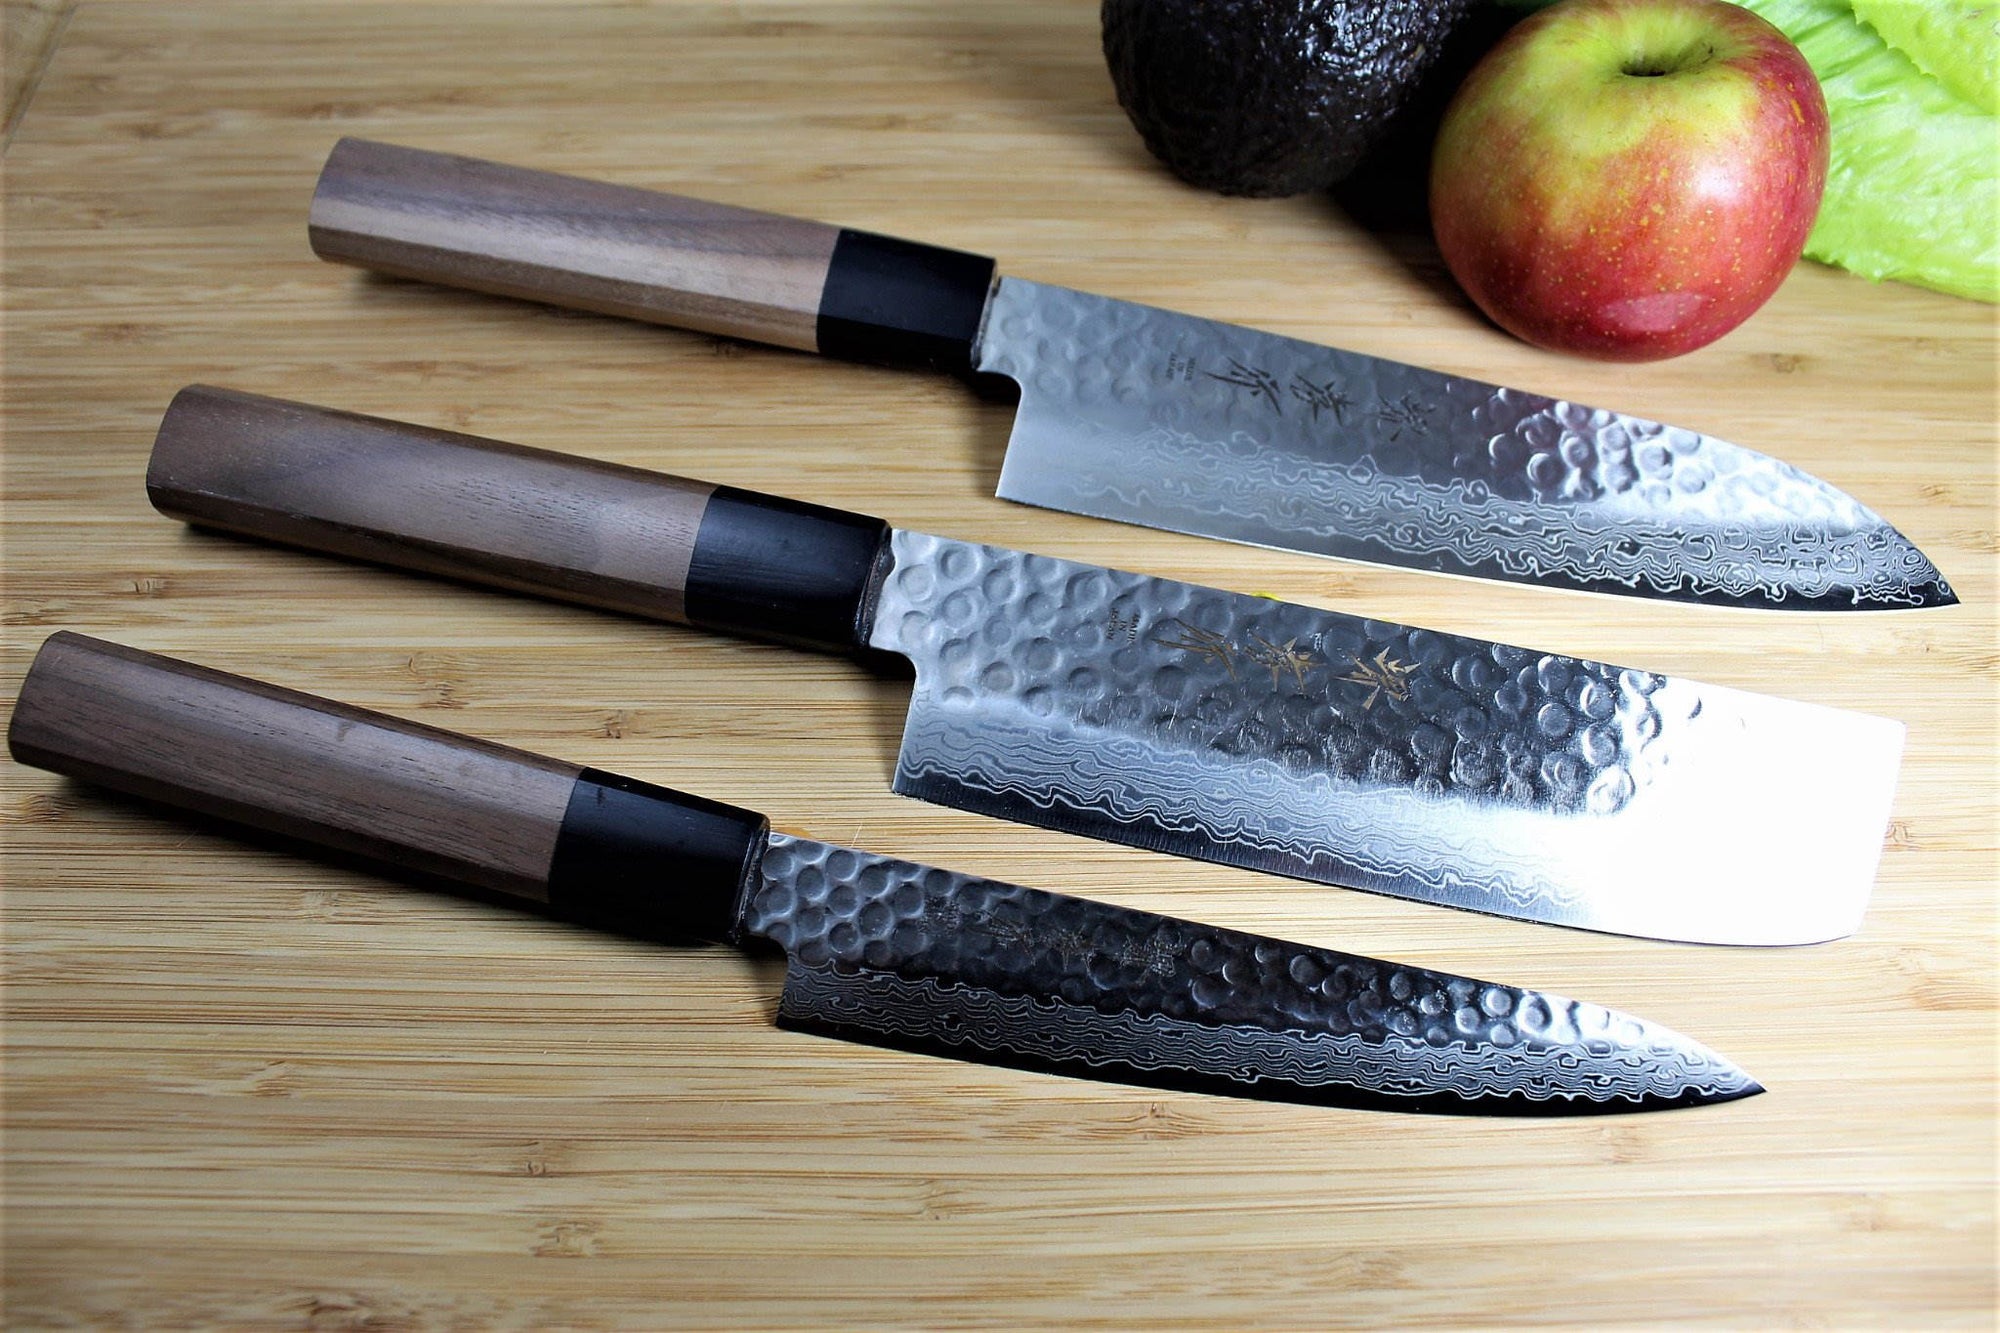 Gyuto Nakiri and petty Japanese kitchen knives stainless steel on cutting board with apple